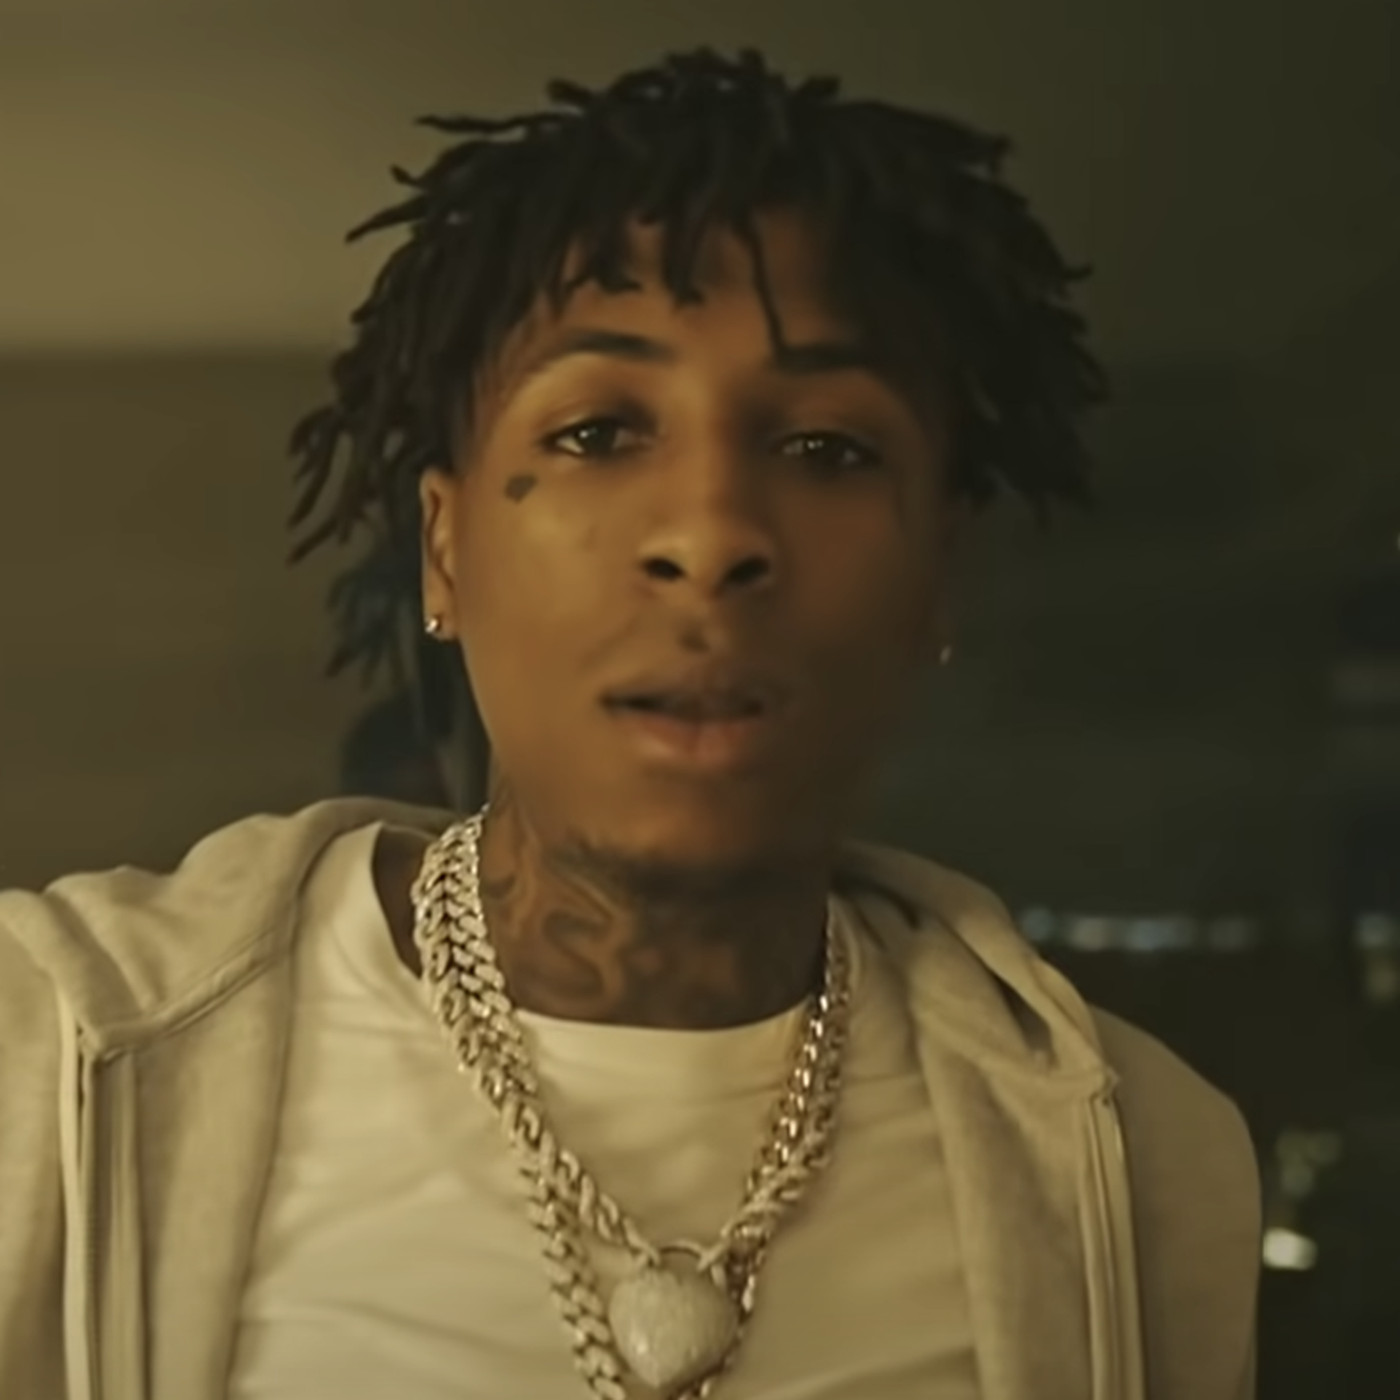 YoungBoy Never Broke Again drops off new visual for “I Ain't Scared”